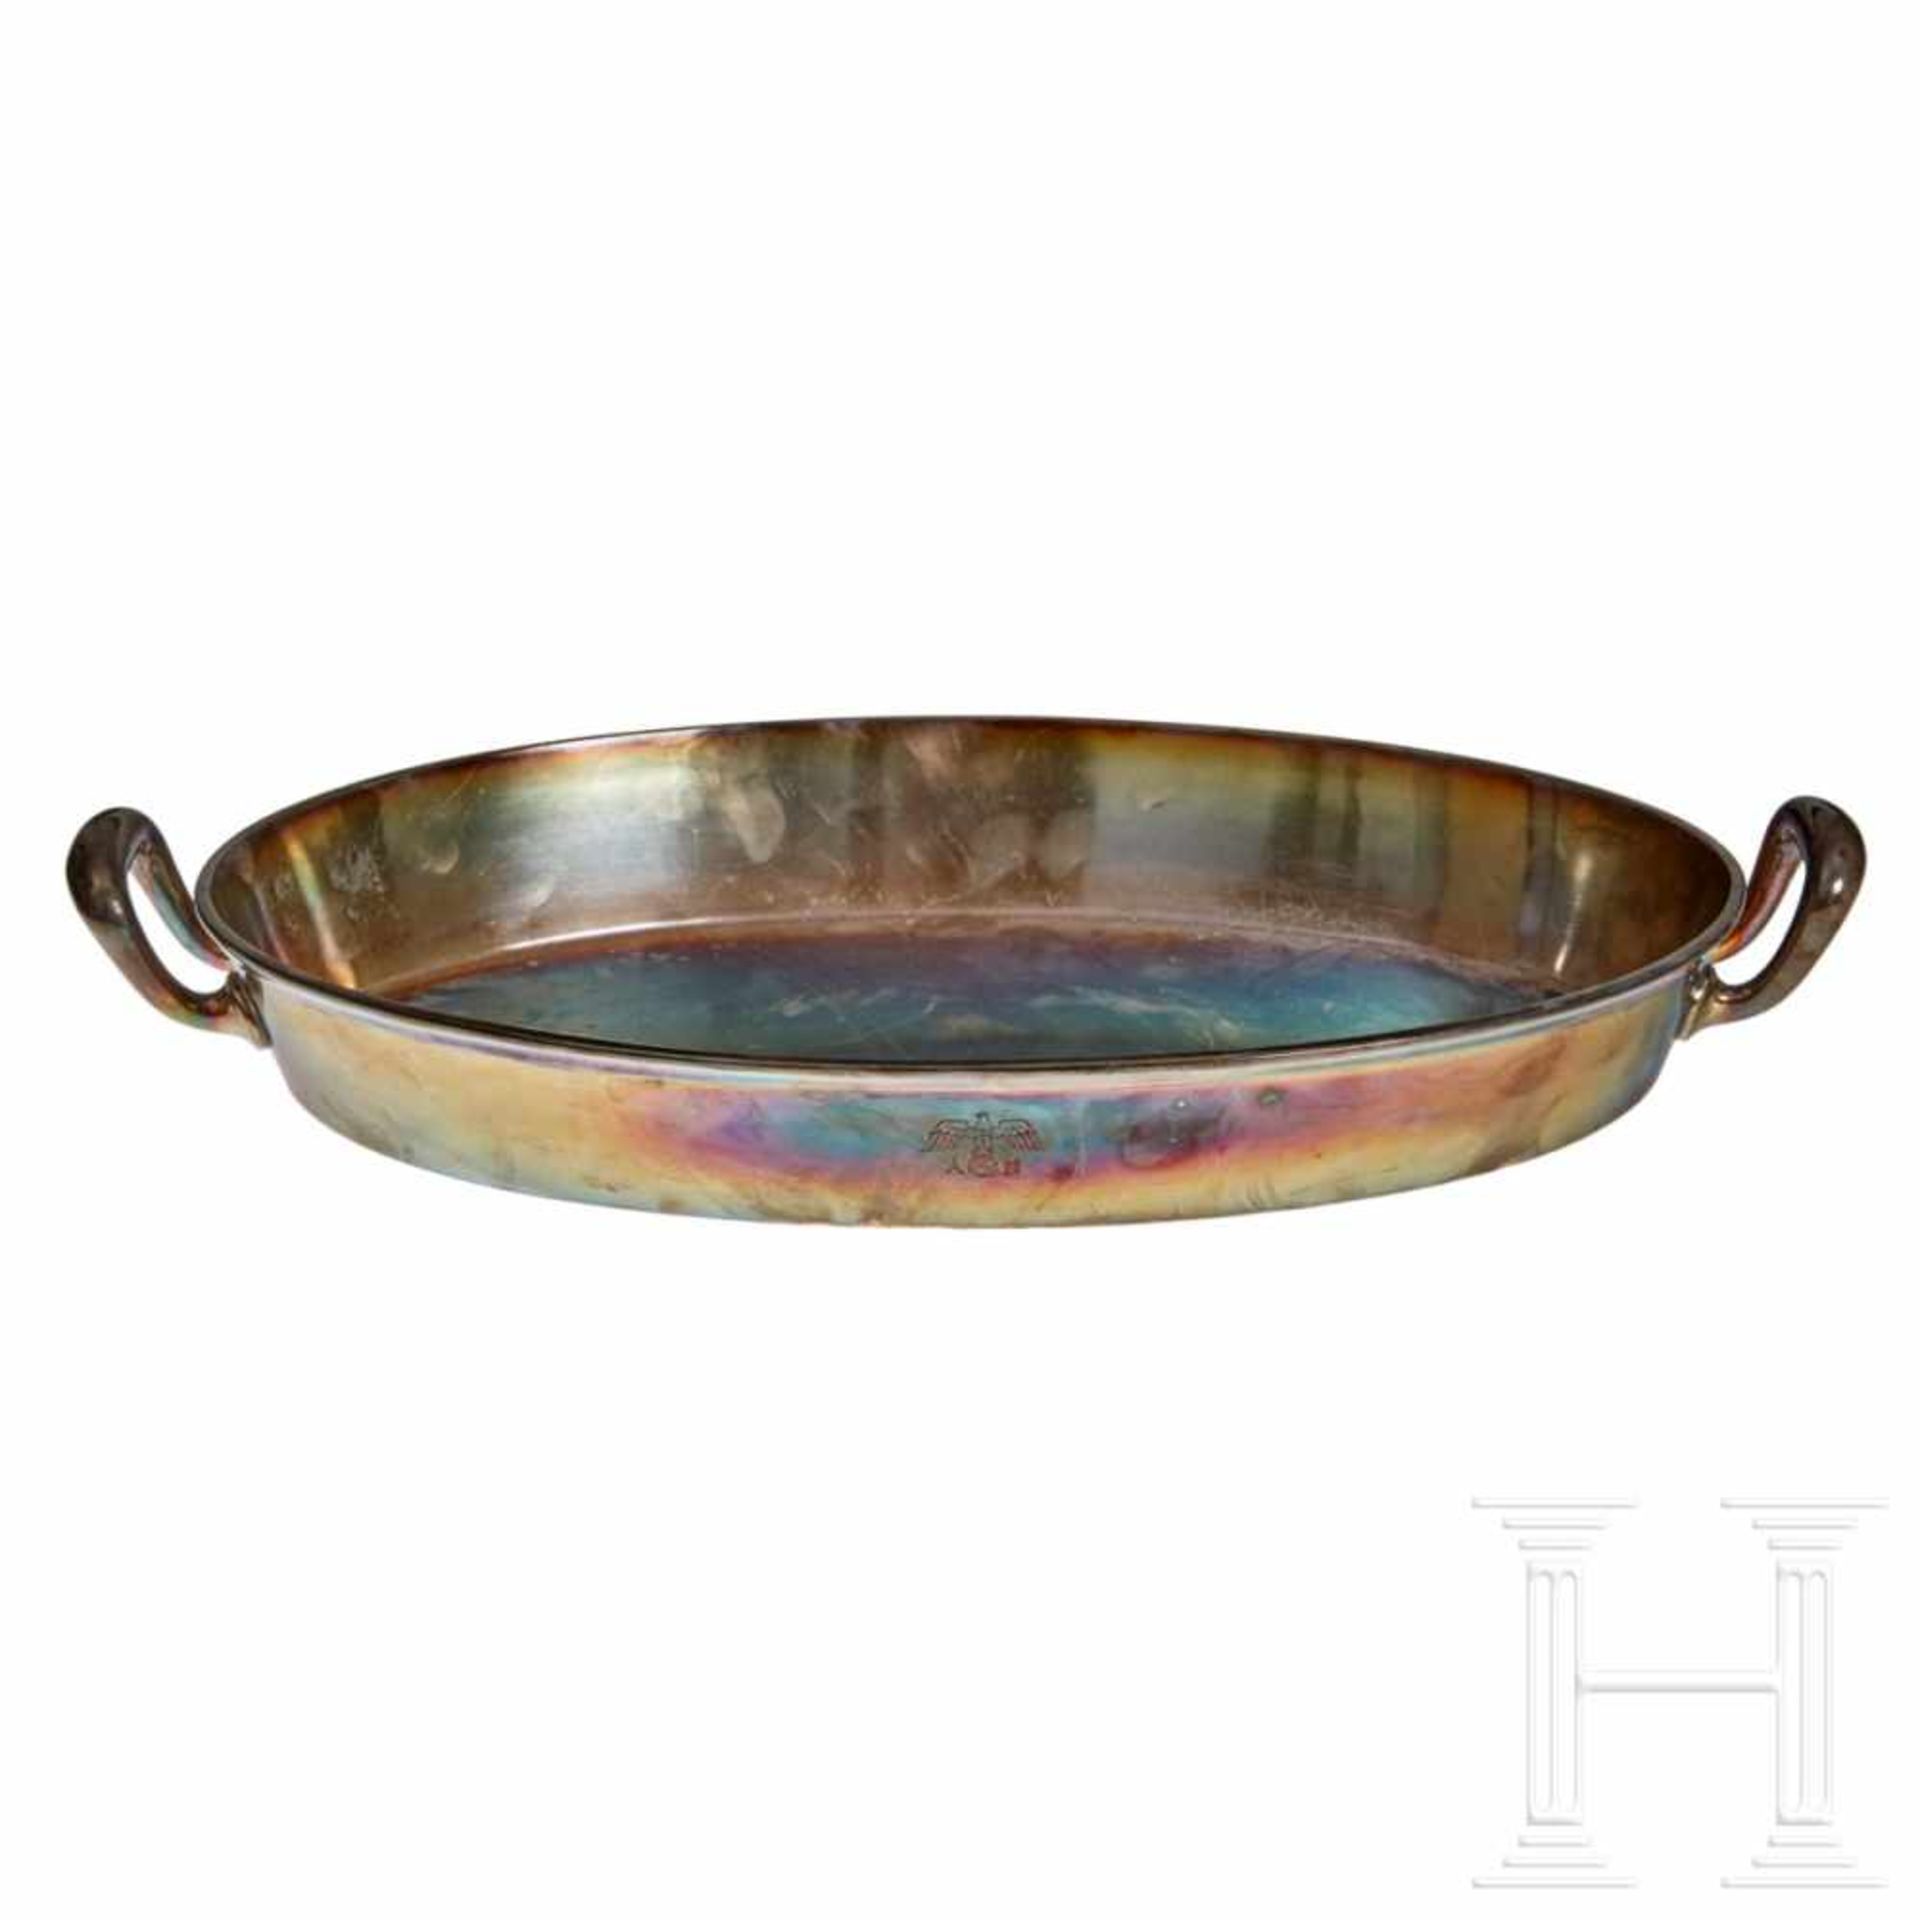 Adolf Hitler – a Roaster from his Personal Silver ServiceOval, elongated with handles at each